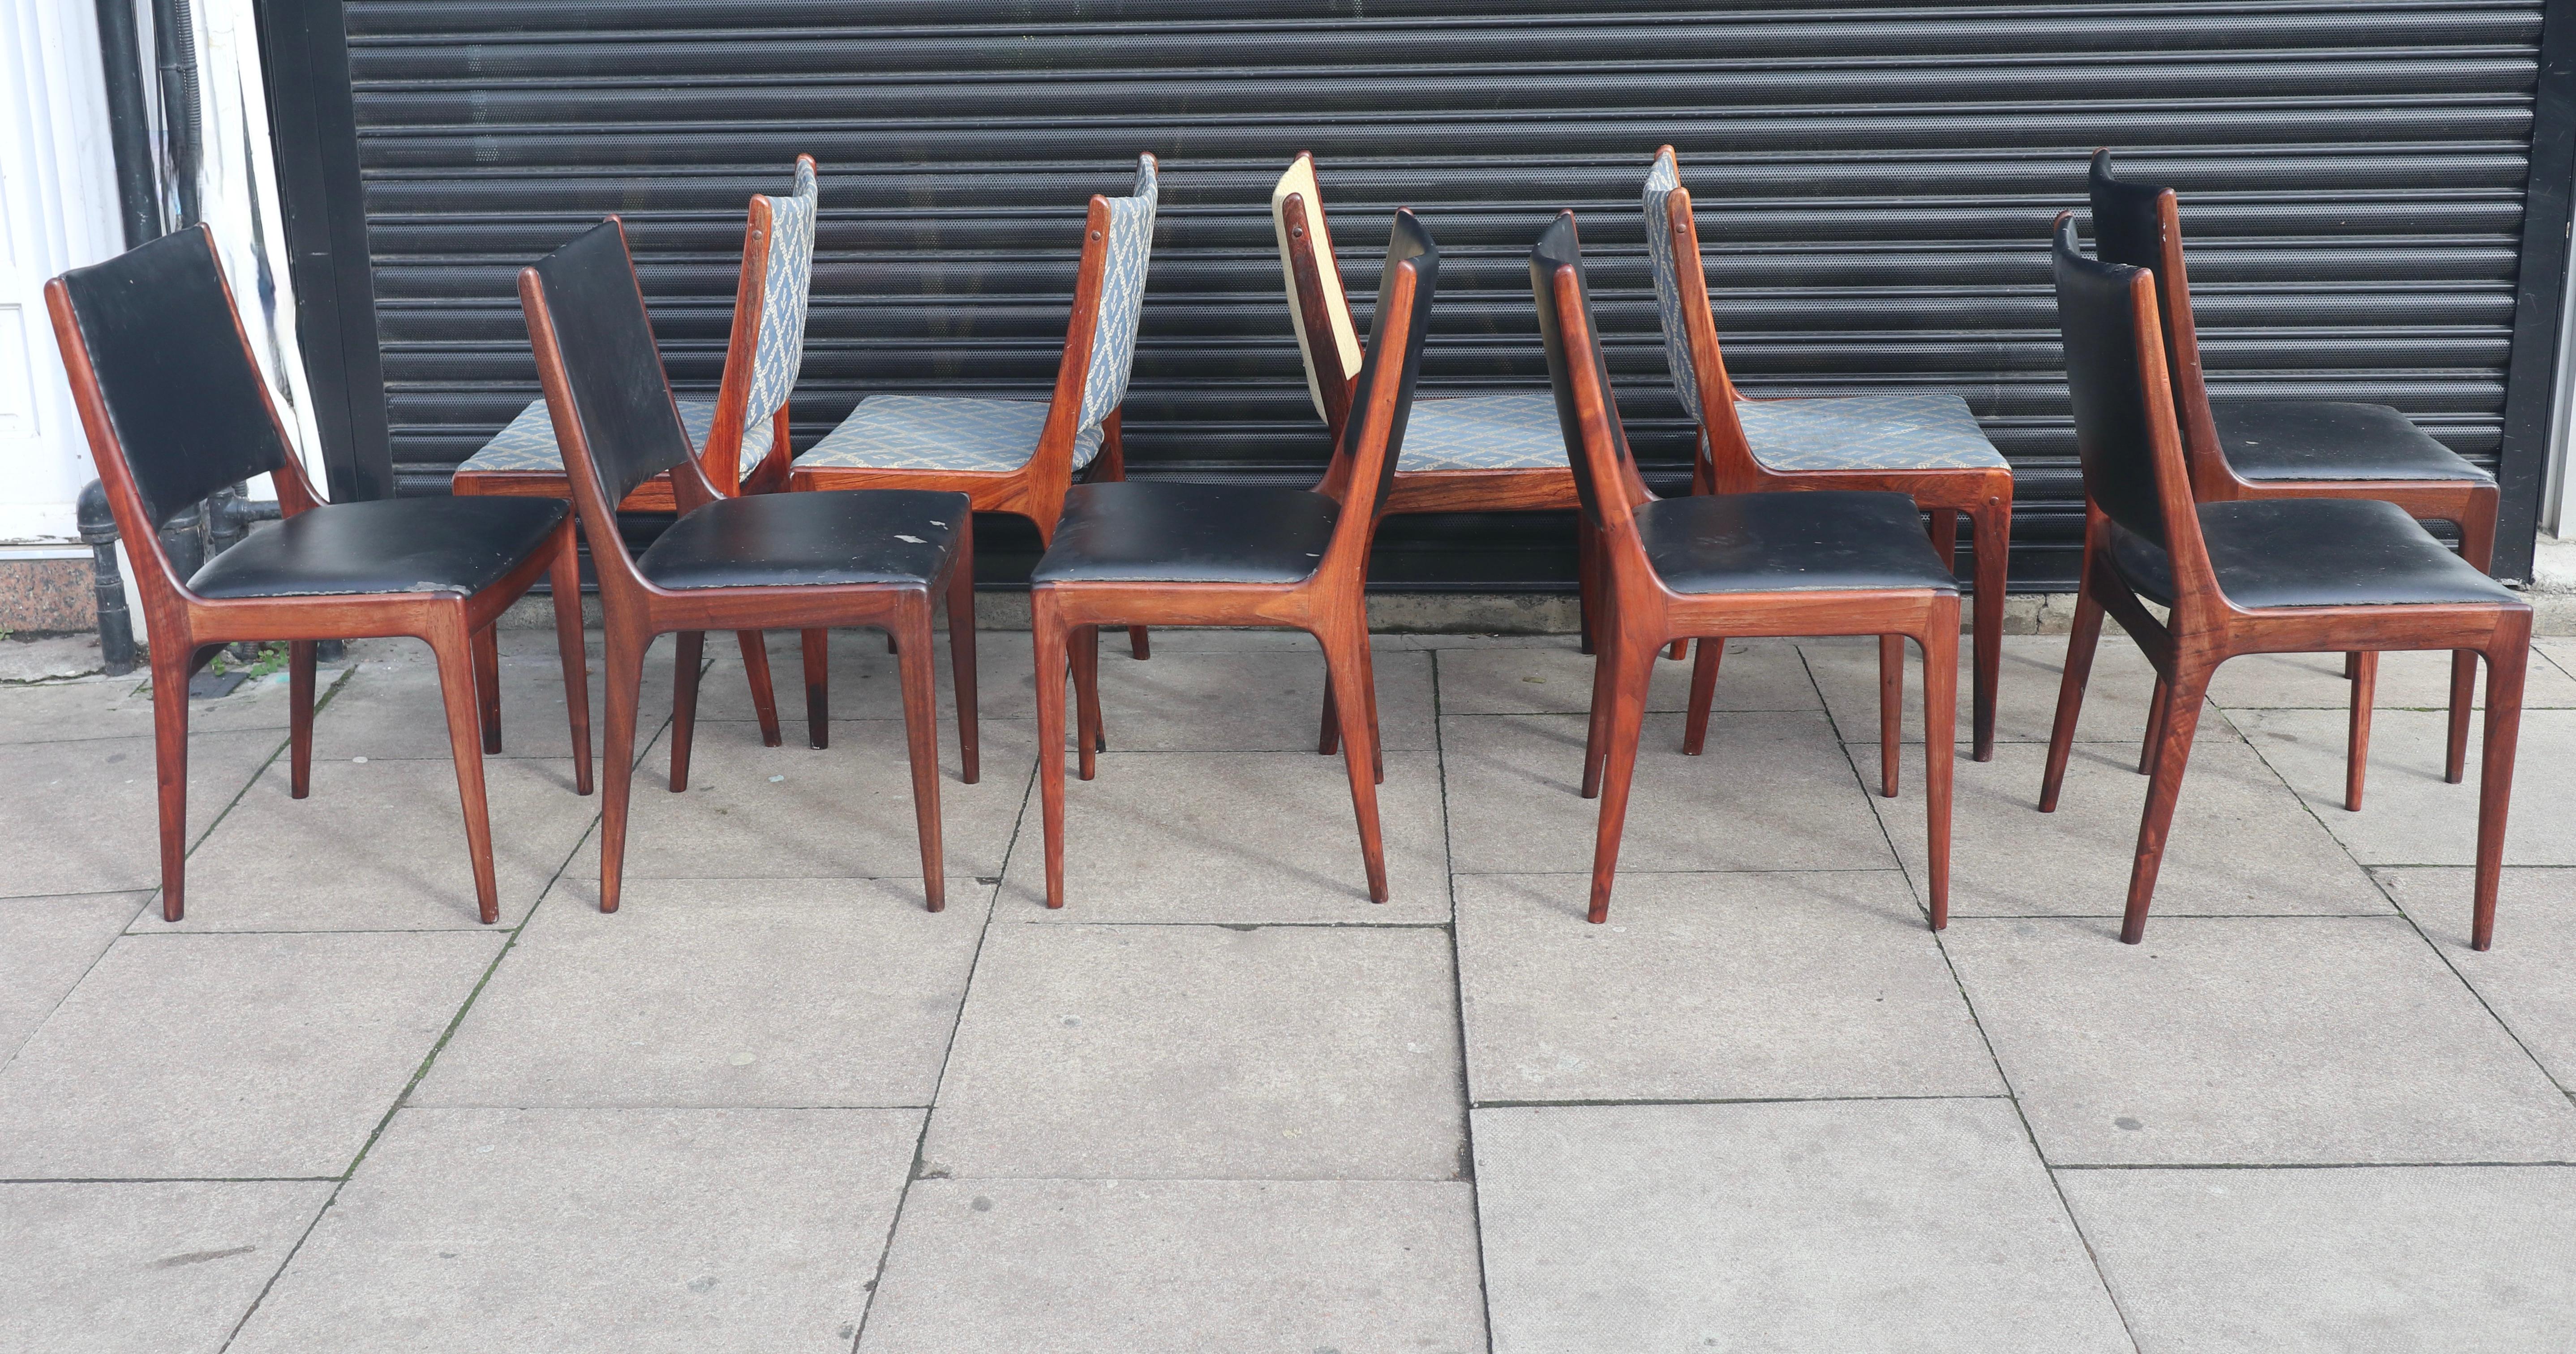 Ten vintage 1960s Teak framed dining chairs by Johannes Andersen for Uldum Møbelfabrik. The chairs have original and worn upholstery and are in need of recovering. The teak frames are in good vintage condition, and will be waxed and polished, prior